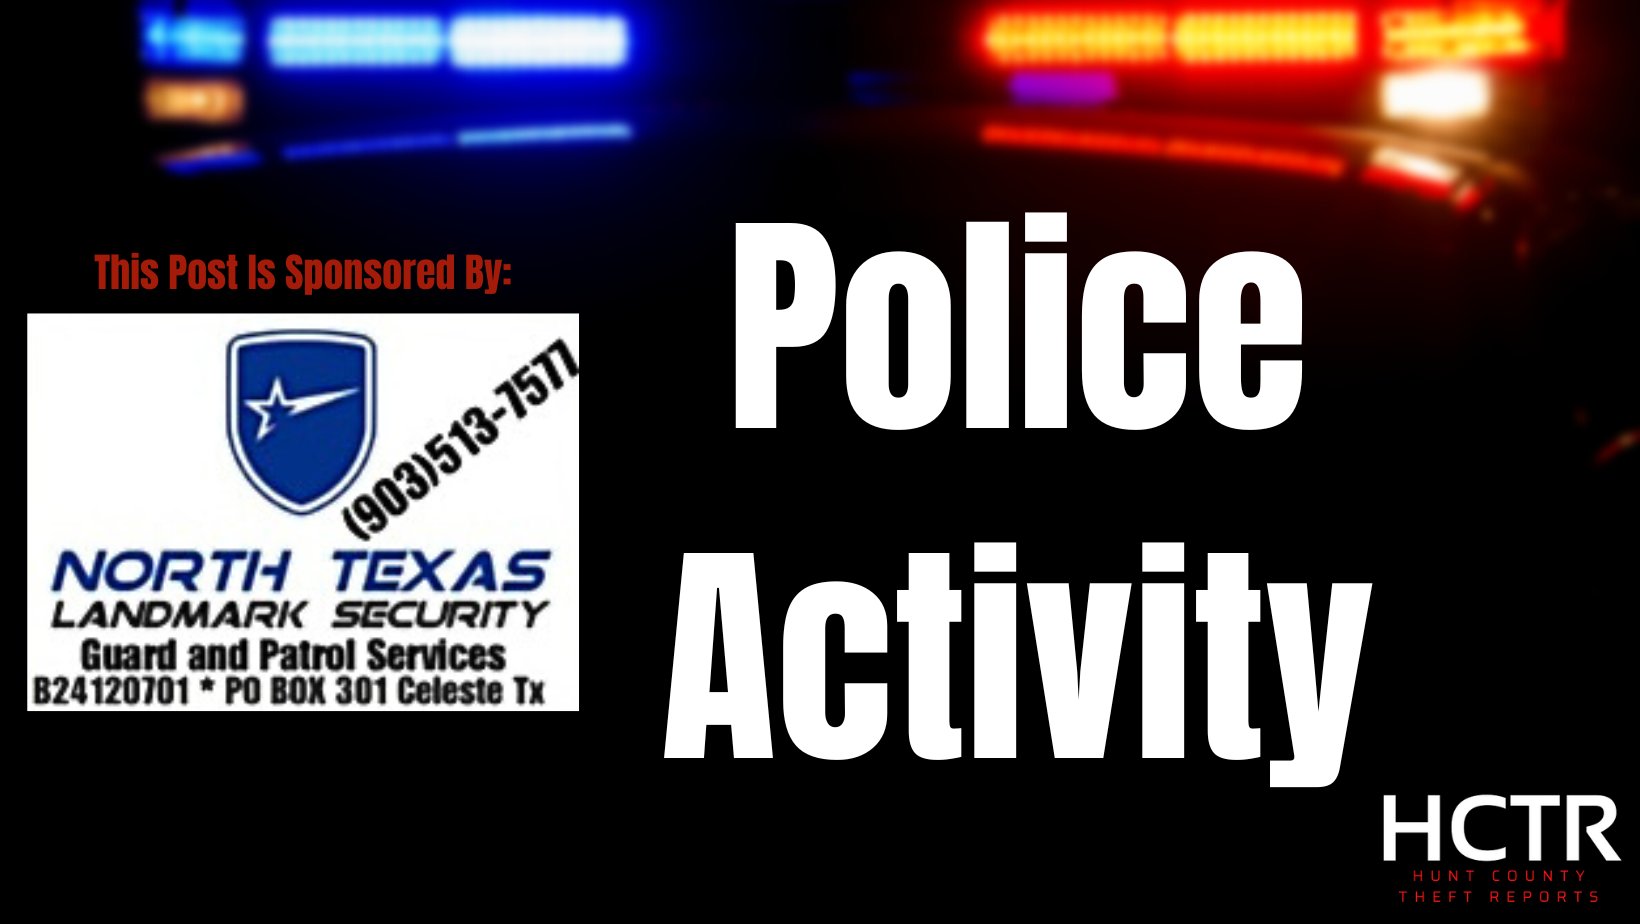 hunt county theft reports